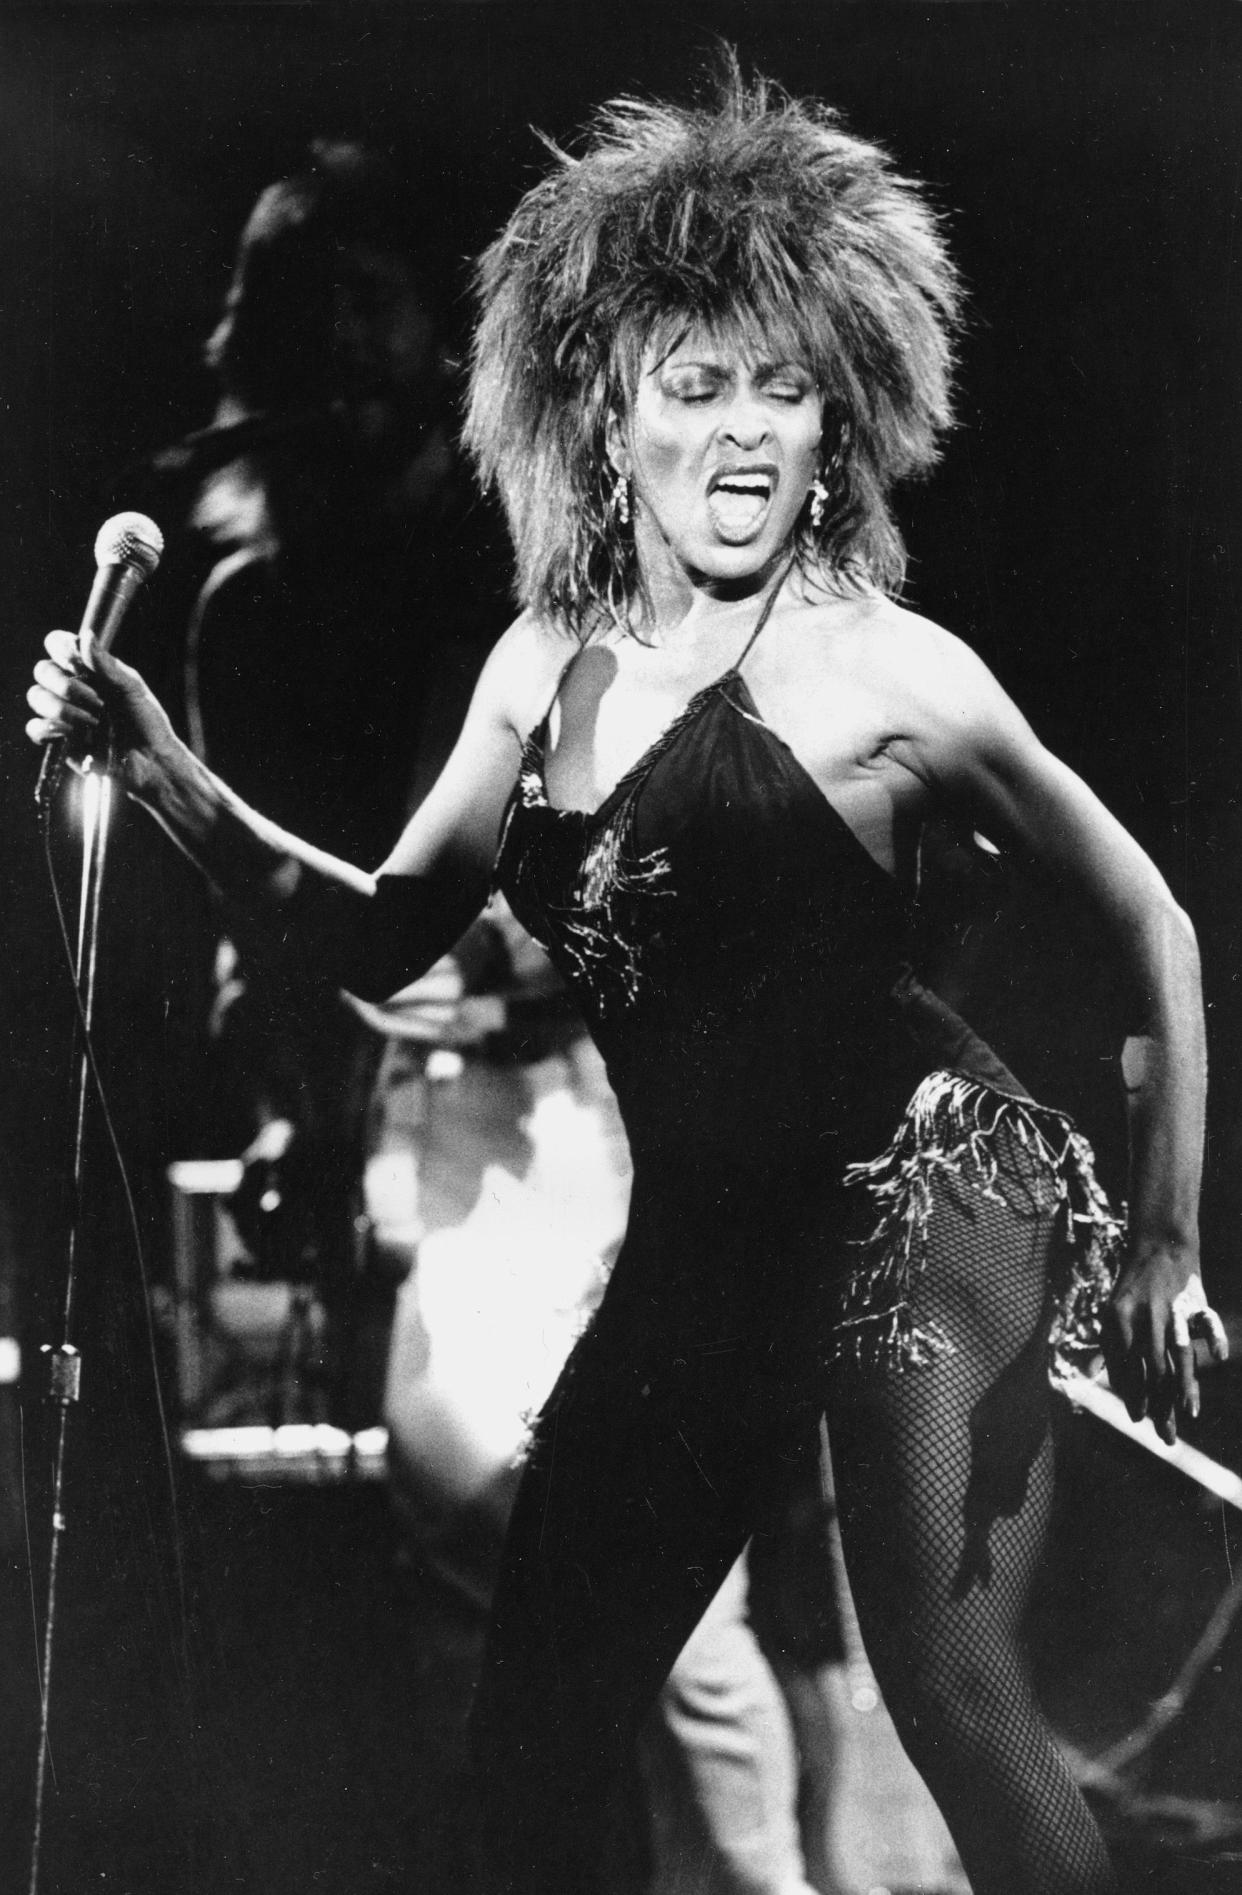 Sunday's Juneteenth TV programming will include a Tina Turner concert from 1990. (AP Photo/Phil Ramey, File)